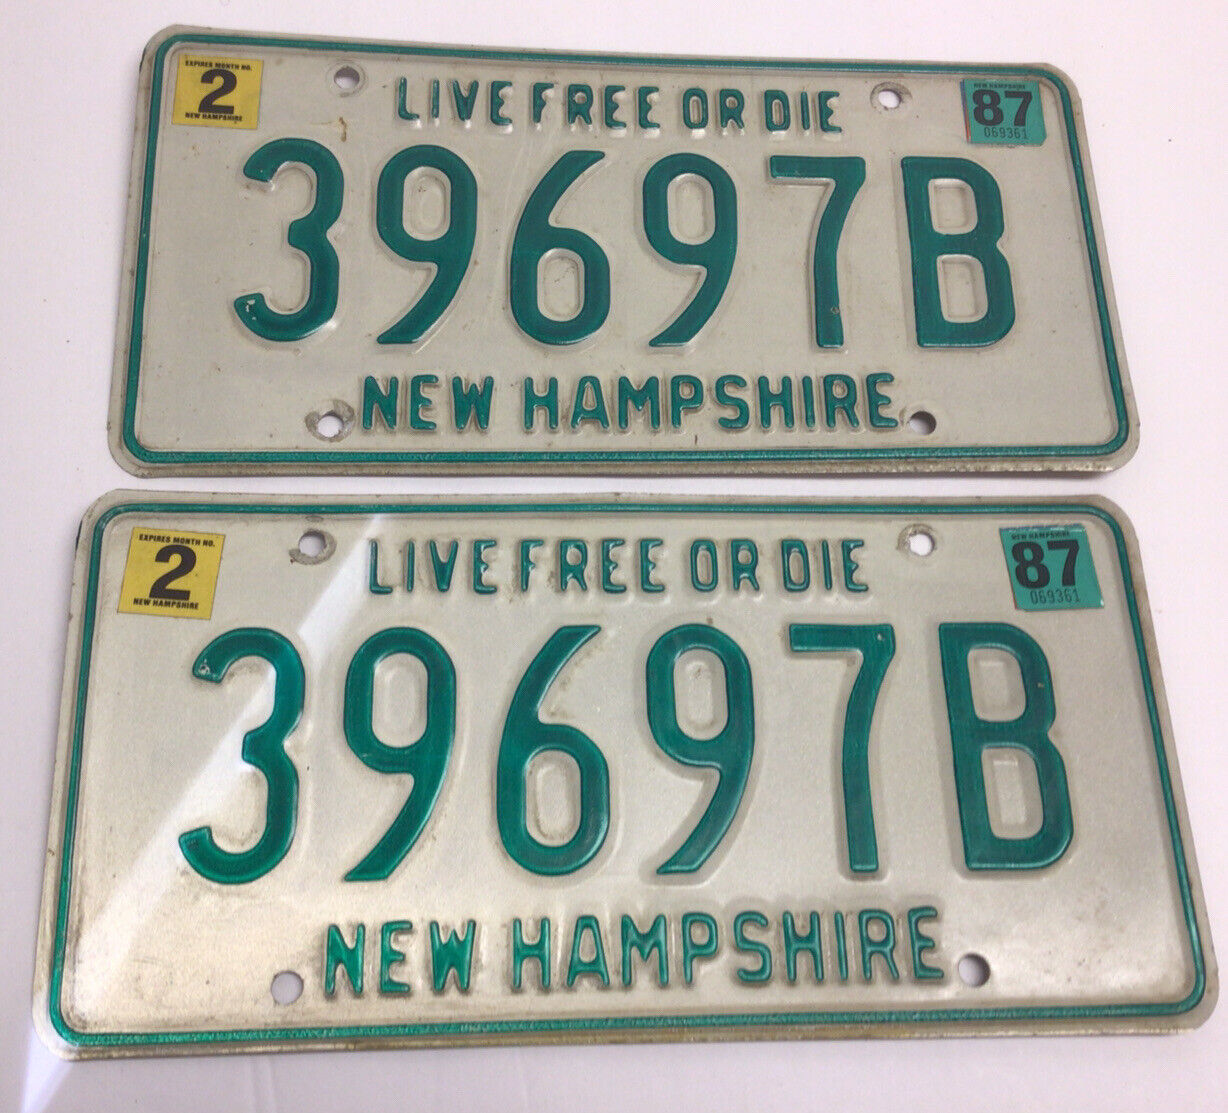 Lot 2 1980s 1987 New Hampshire NH License Plate Pair Set 39697B Live Free Or Die